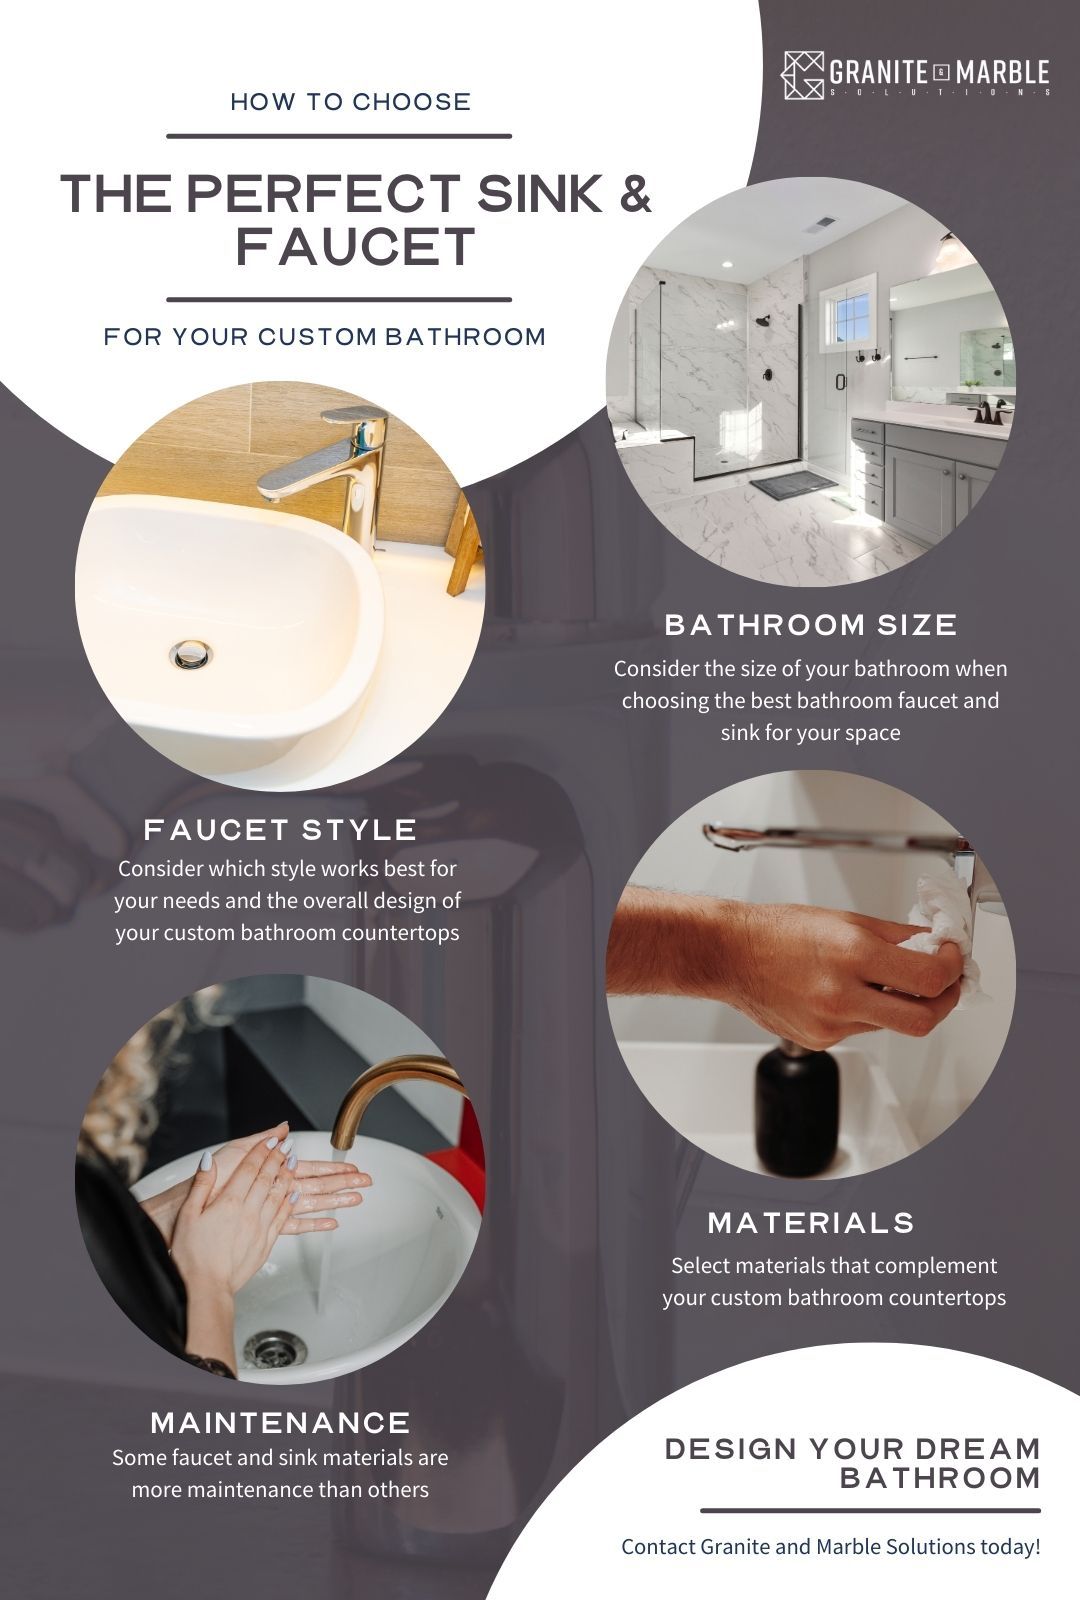 M30516-blitz-How to Choose the Perfect Sink and Faucet for Your Custom Bathroom Countertops Infographic (2).jpg